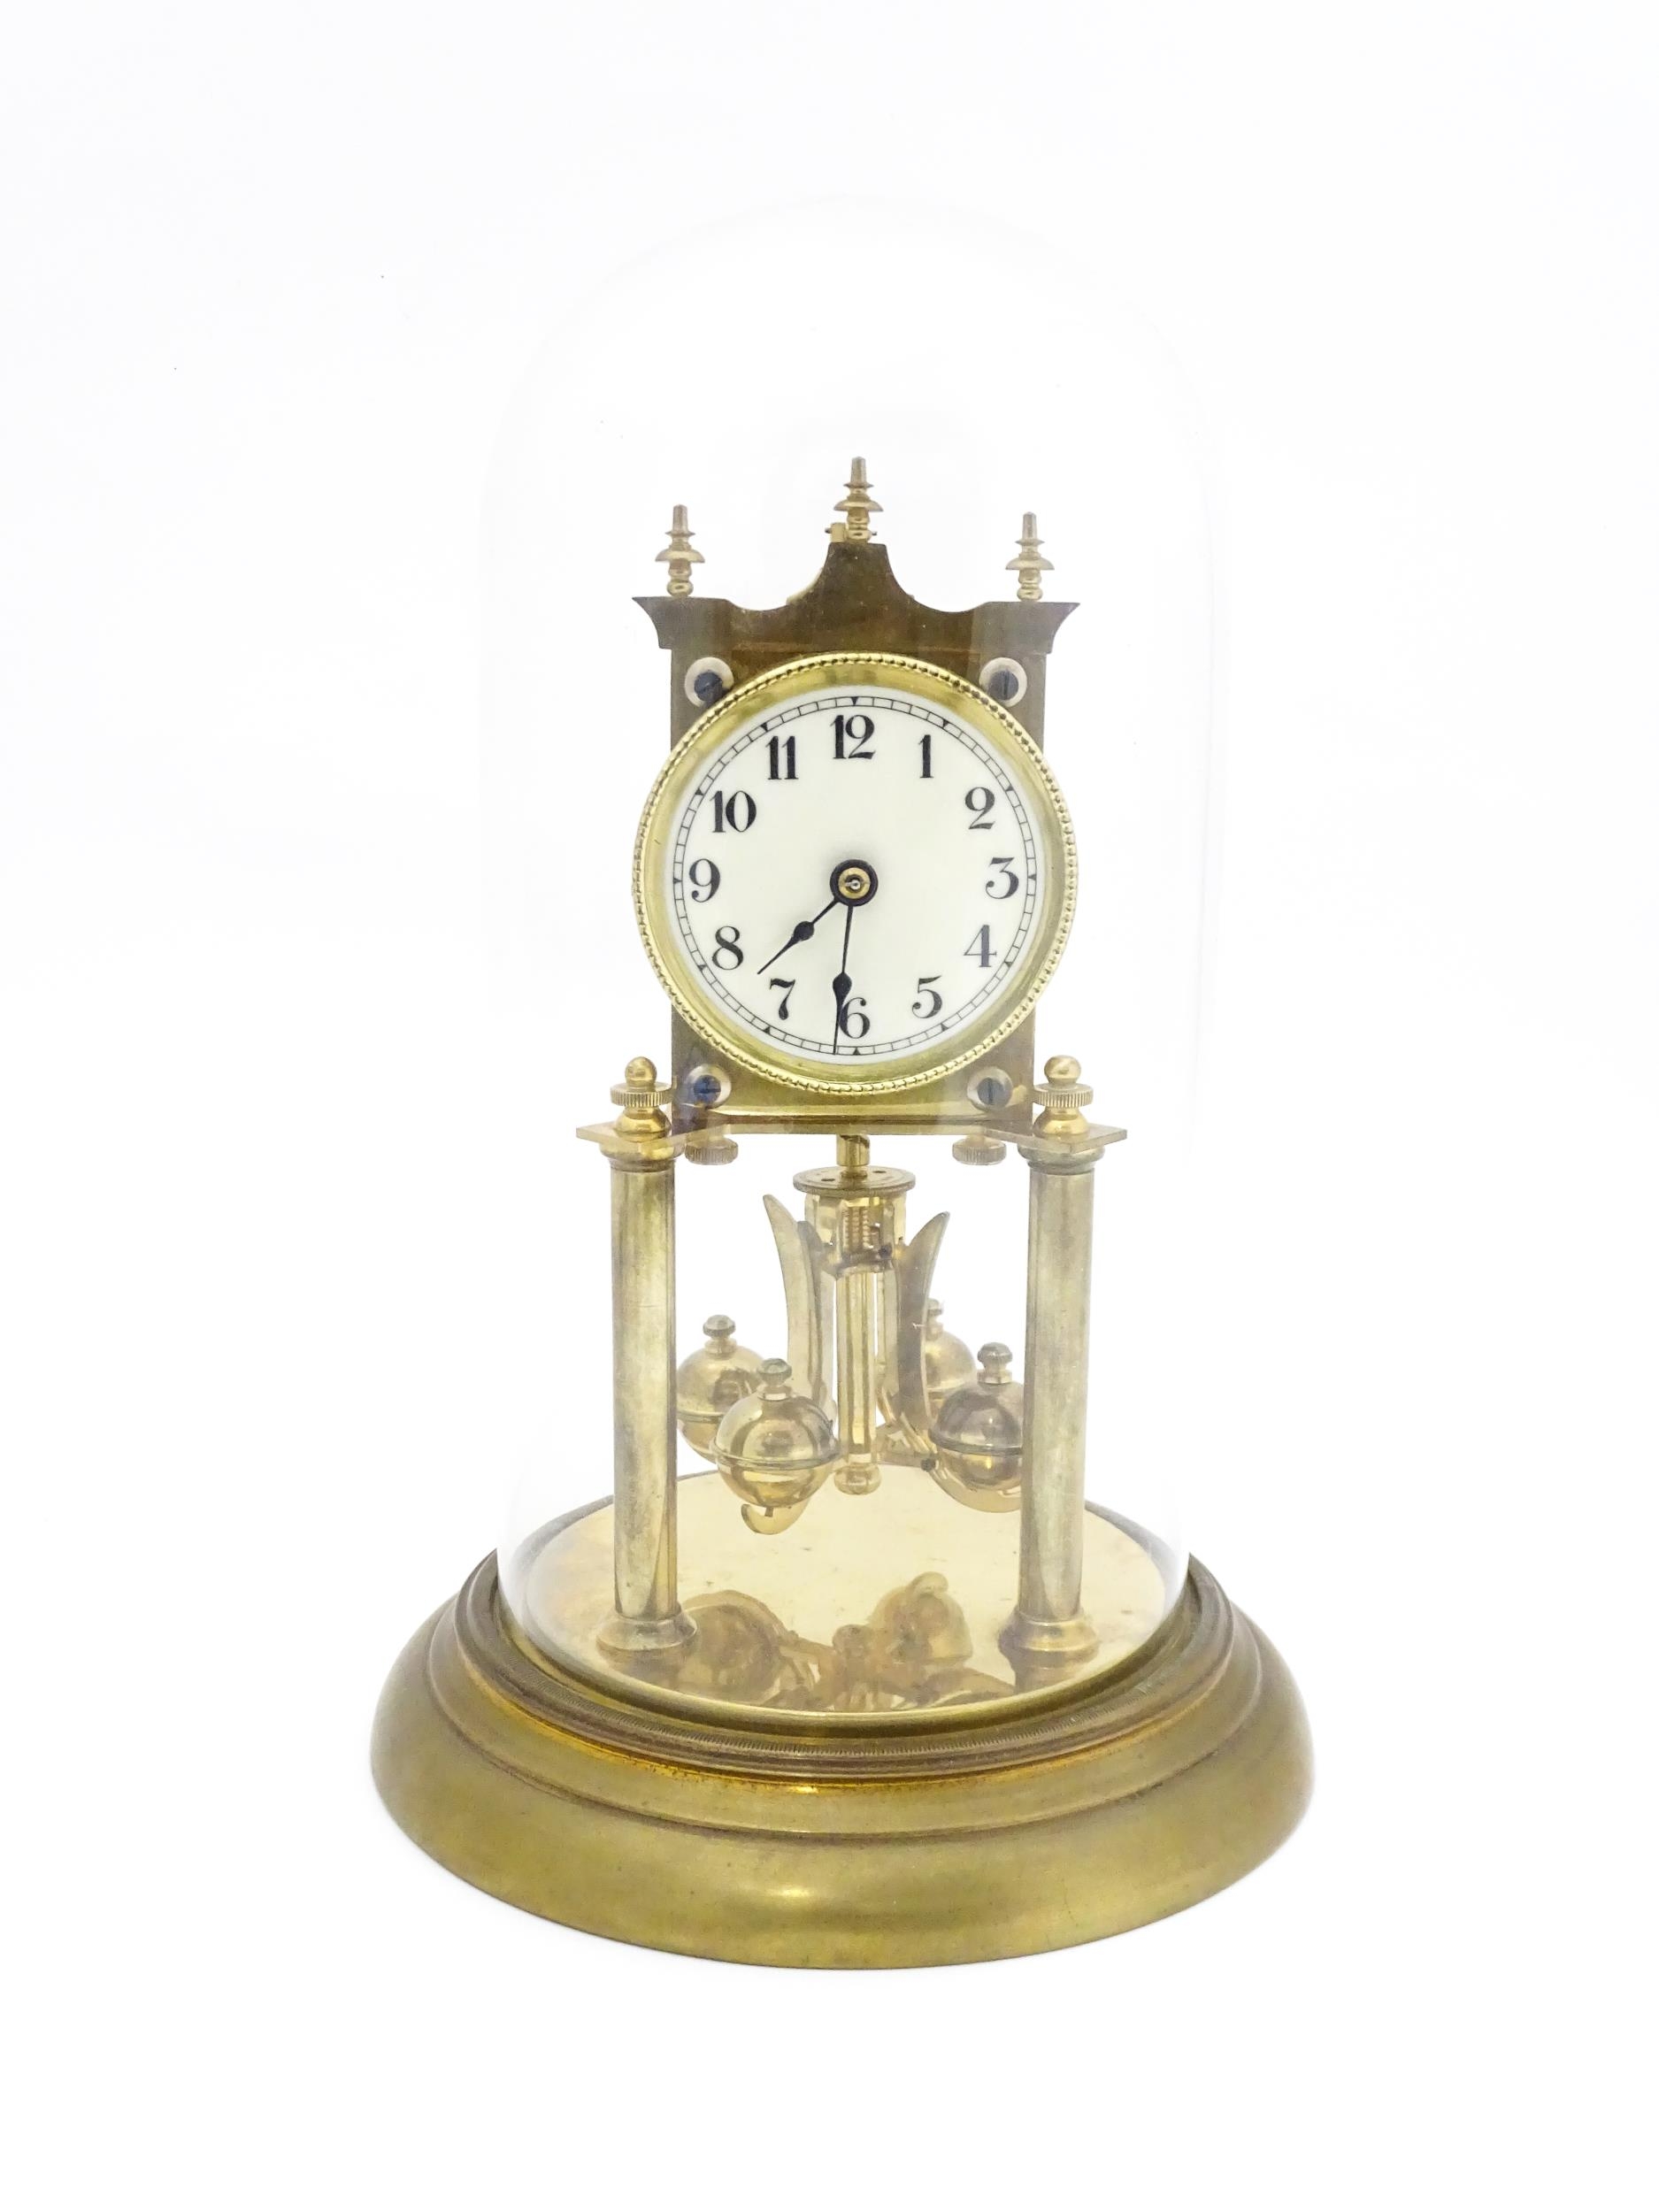 A 20thC anniversary / table clock with white enamel dial and Roman numerals. Under glass dome